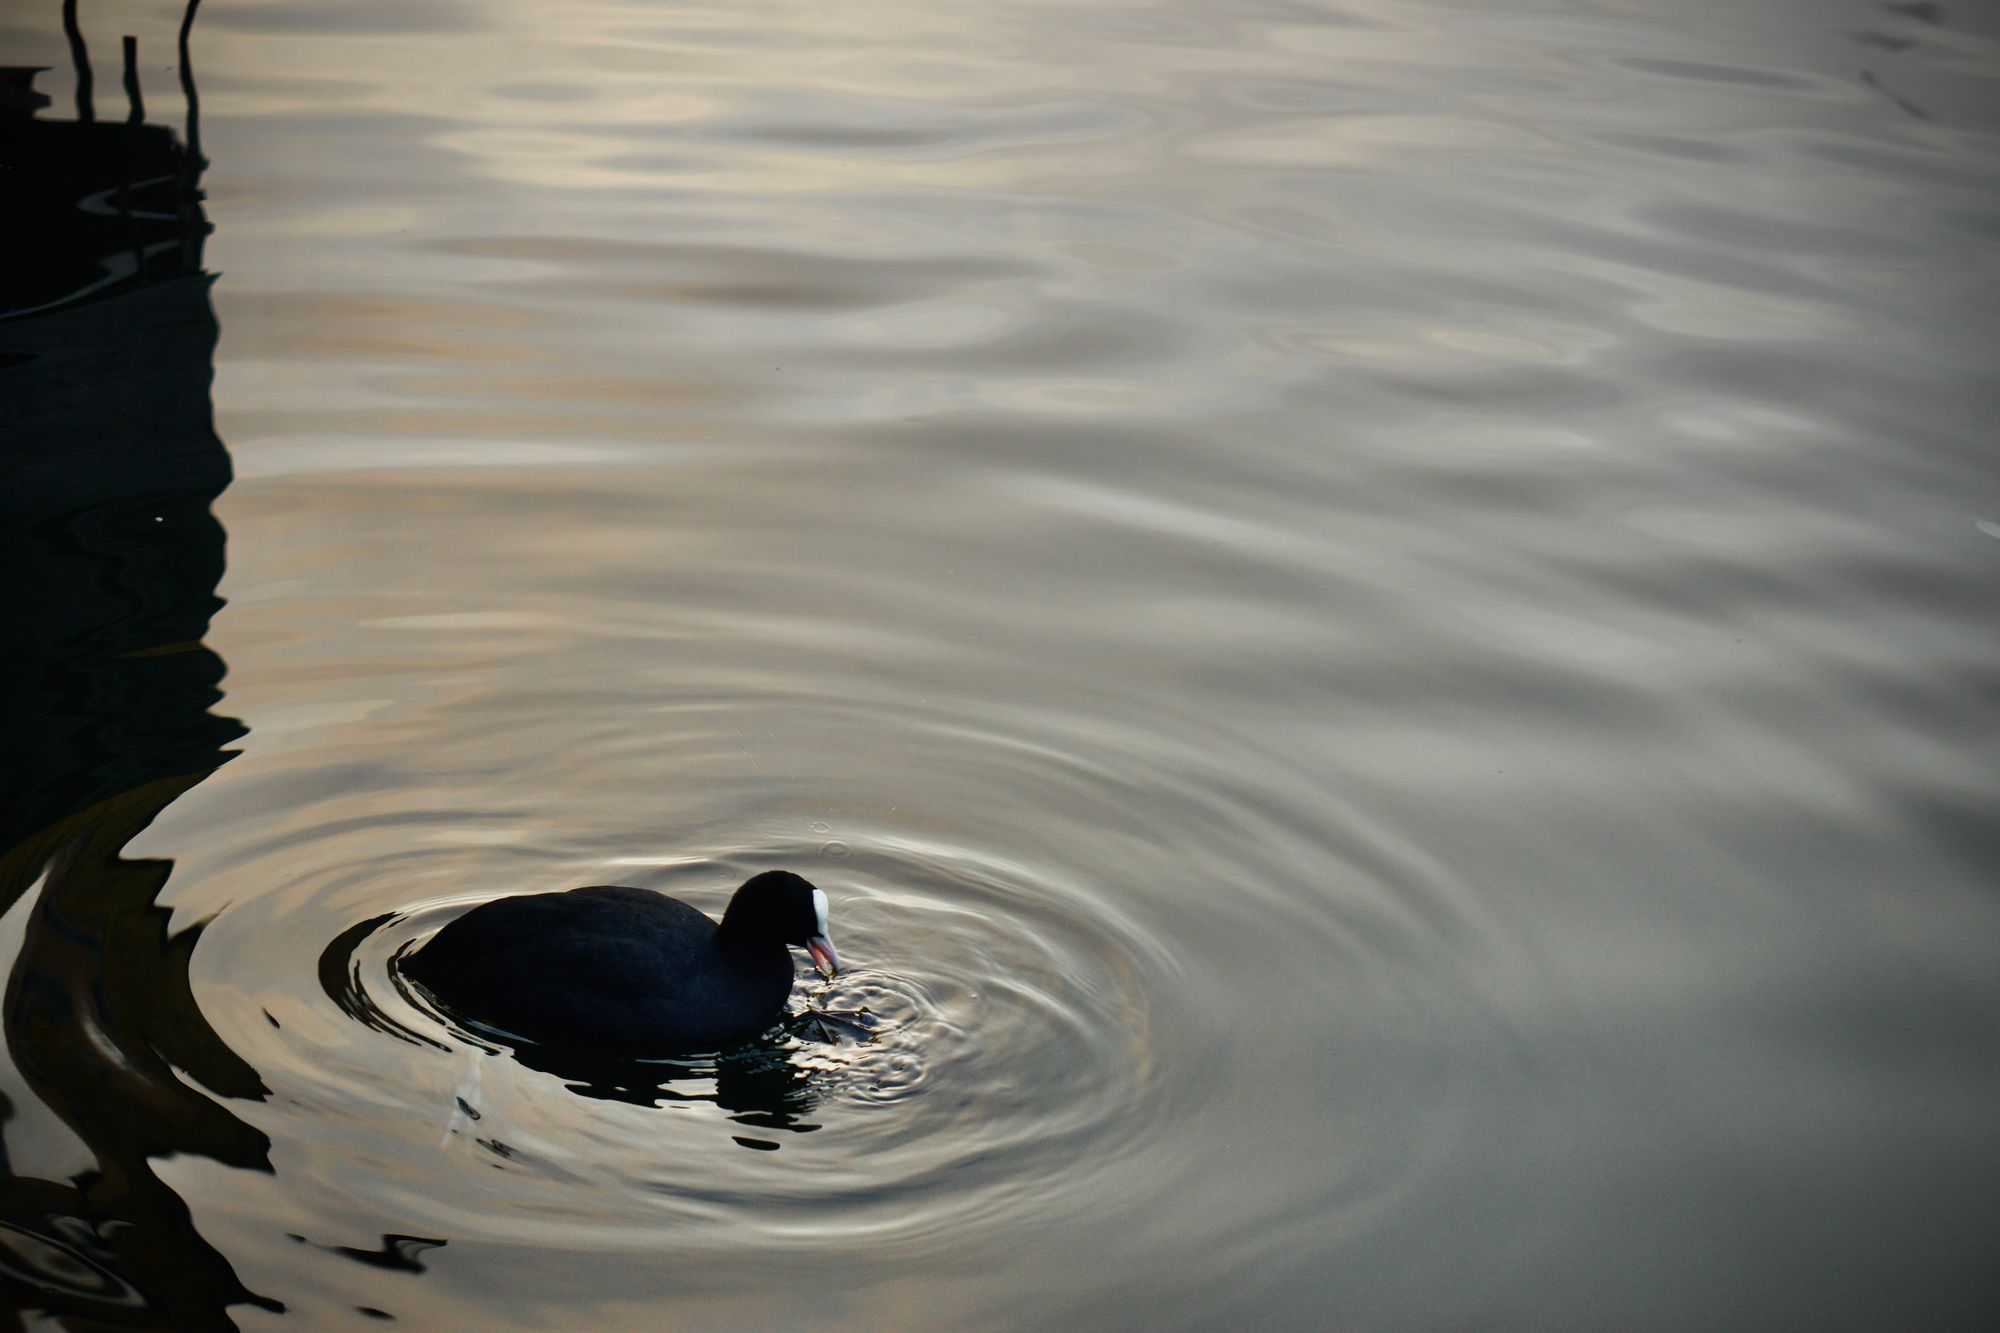 A coot swims in a lake just off a pontoon. They have their mouth open having just been feeding.